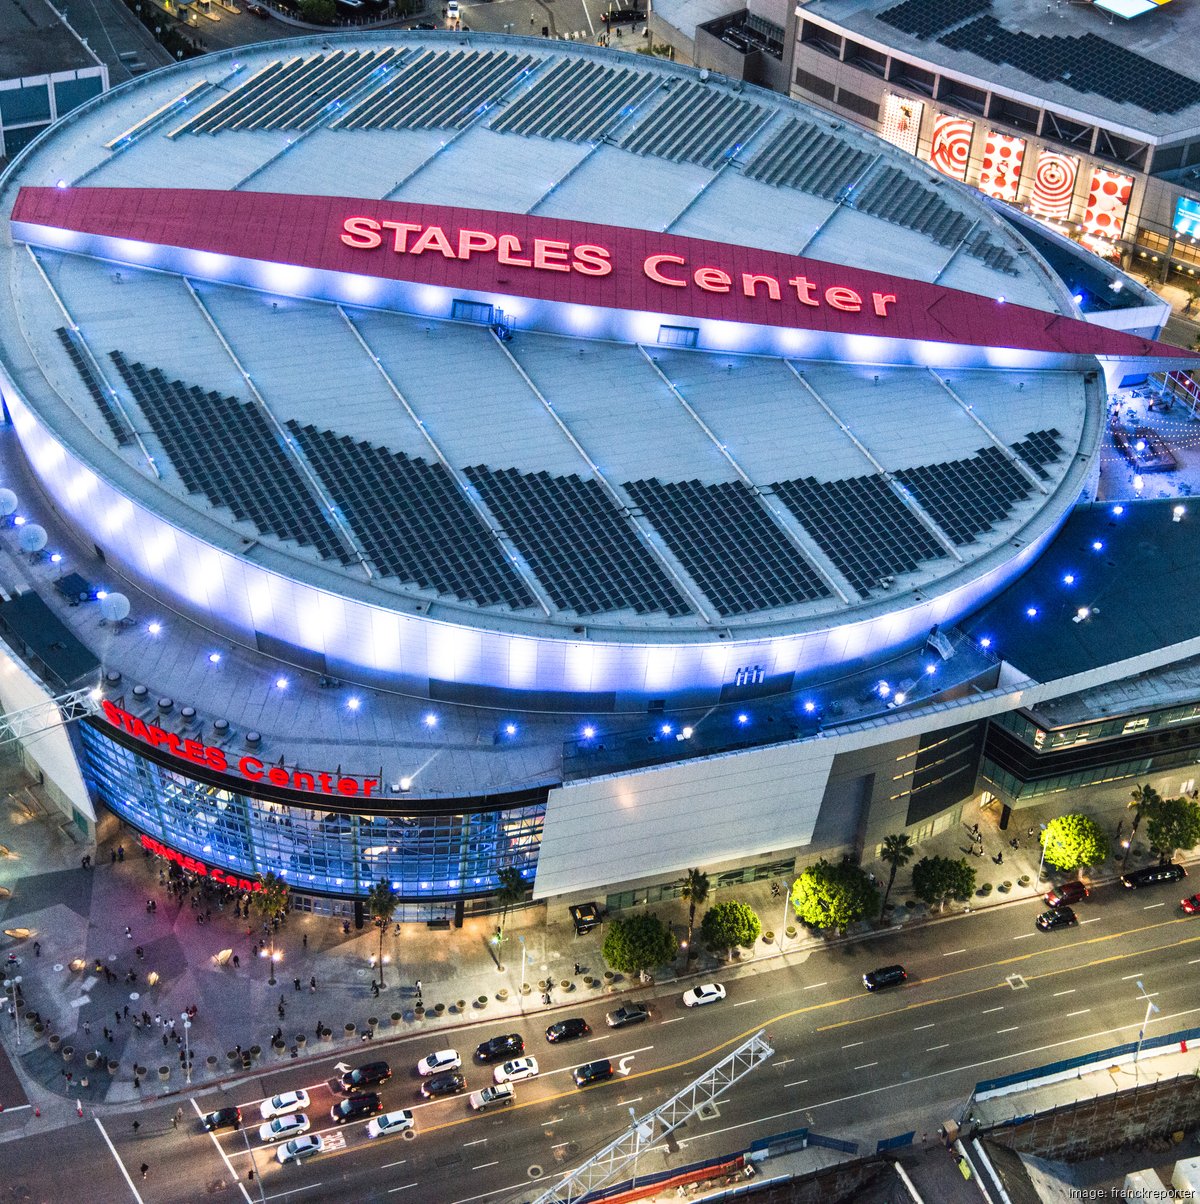 Lakers, Clippers, Kings and STAPLES Center Create Employee Fund to